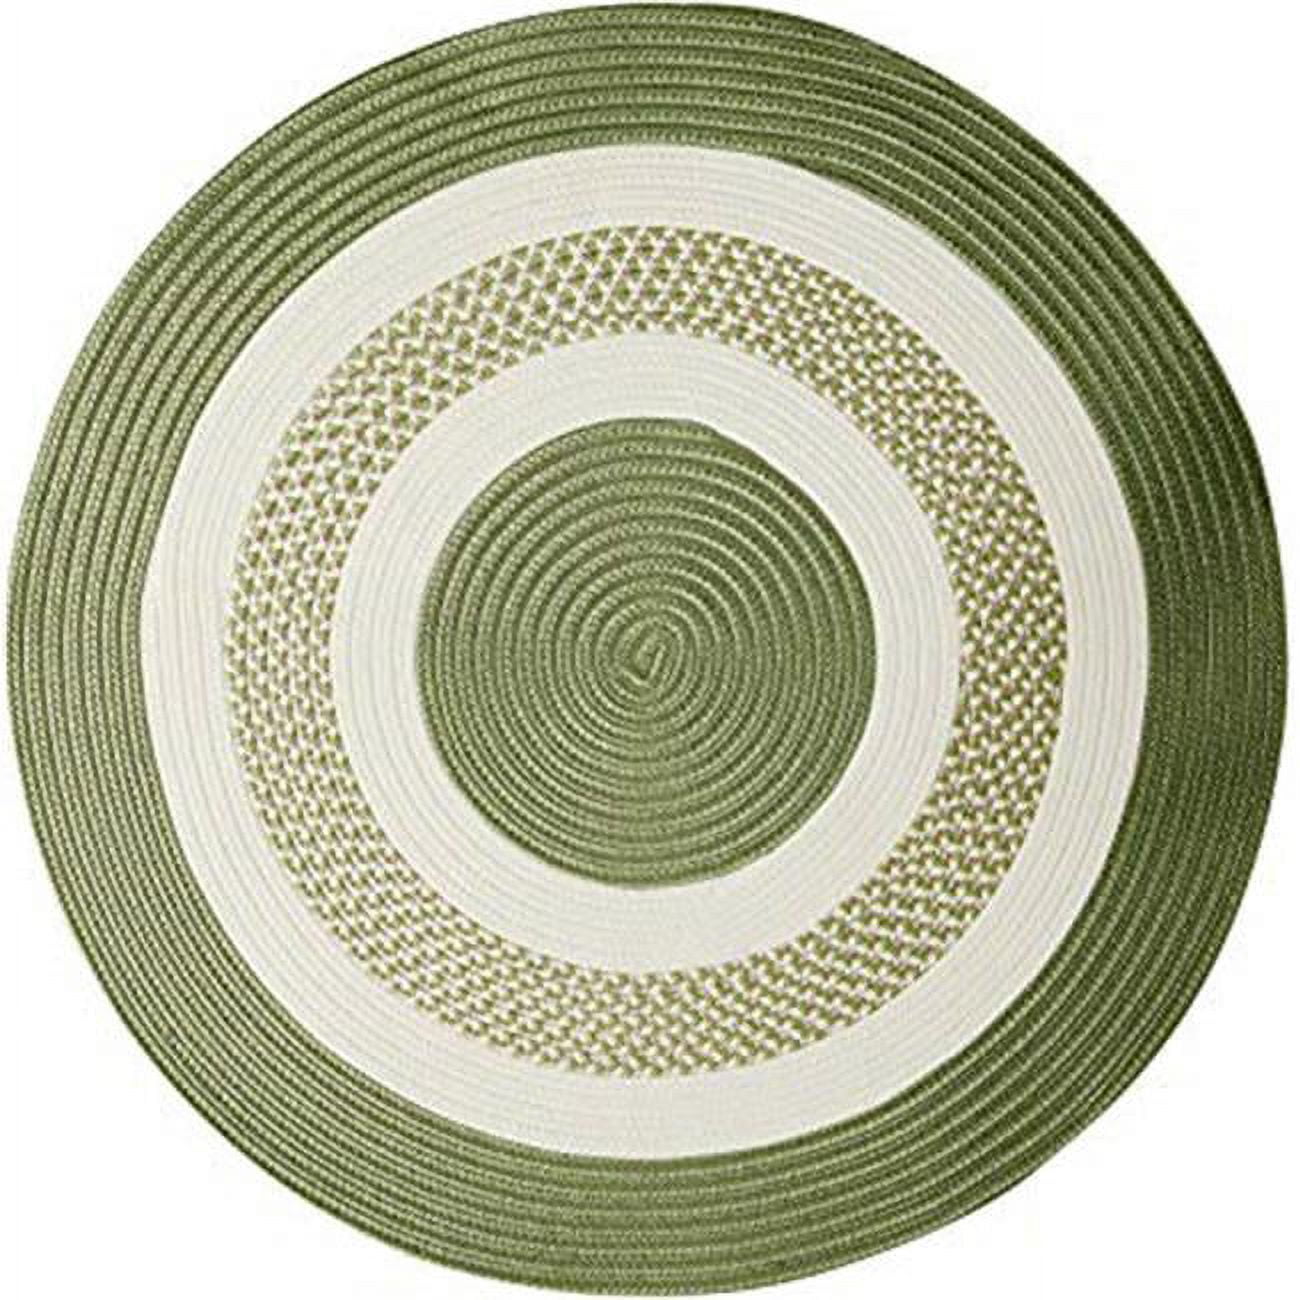 UPC 884381784694 product image for NT61R036X036 3 ft. Crescent Round Rug, Moss Green | upcitemdb.com